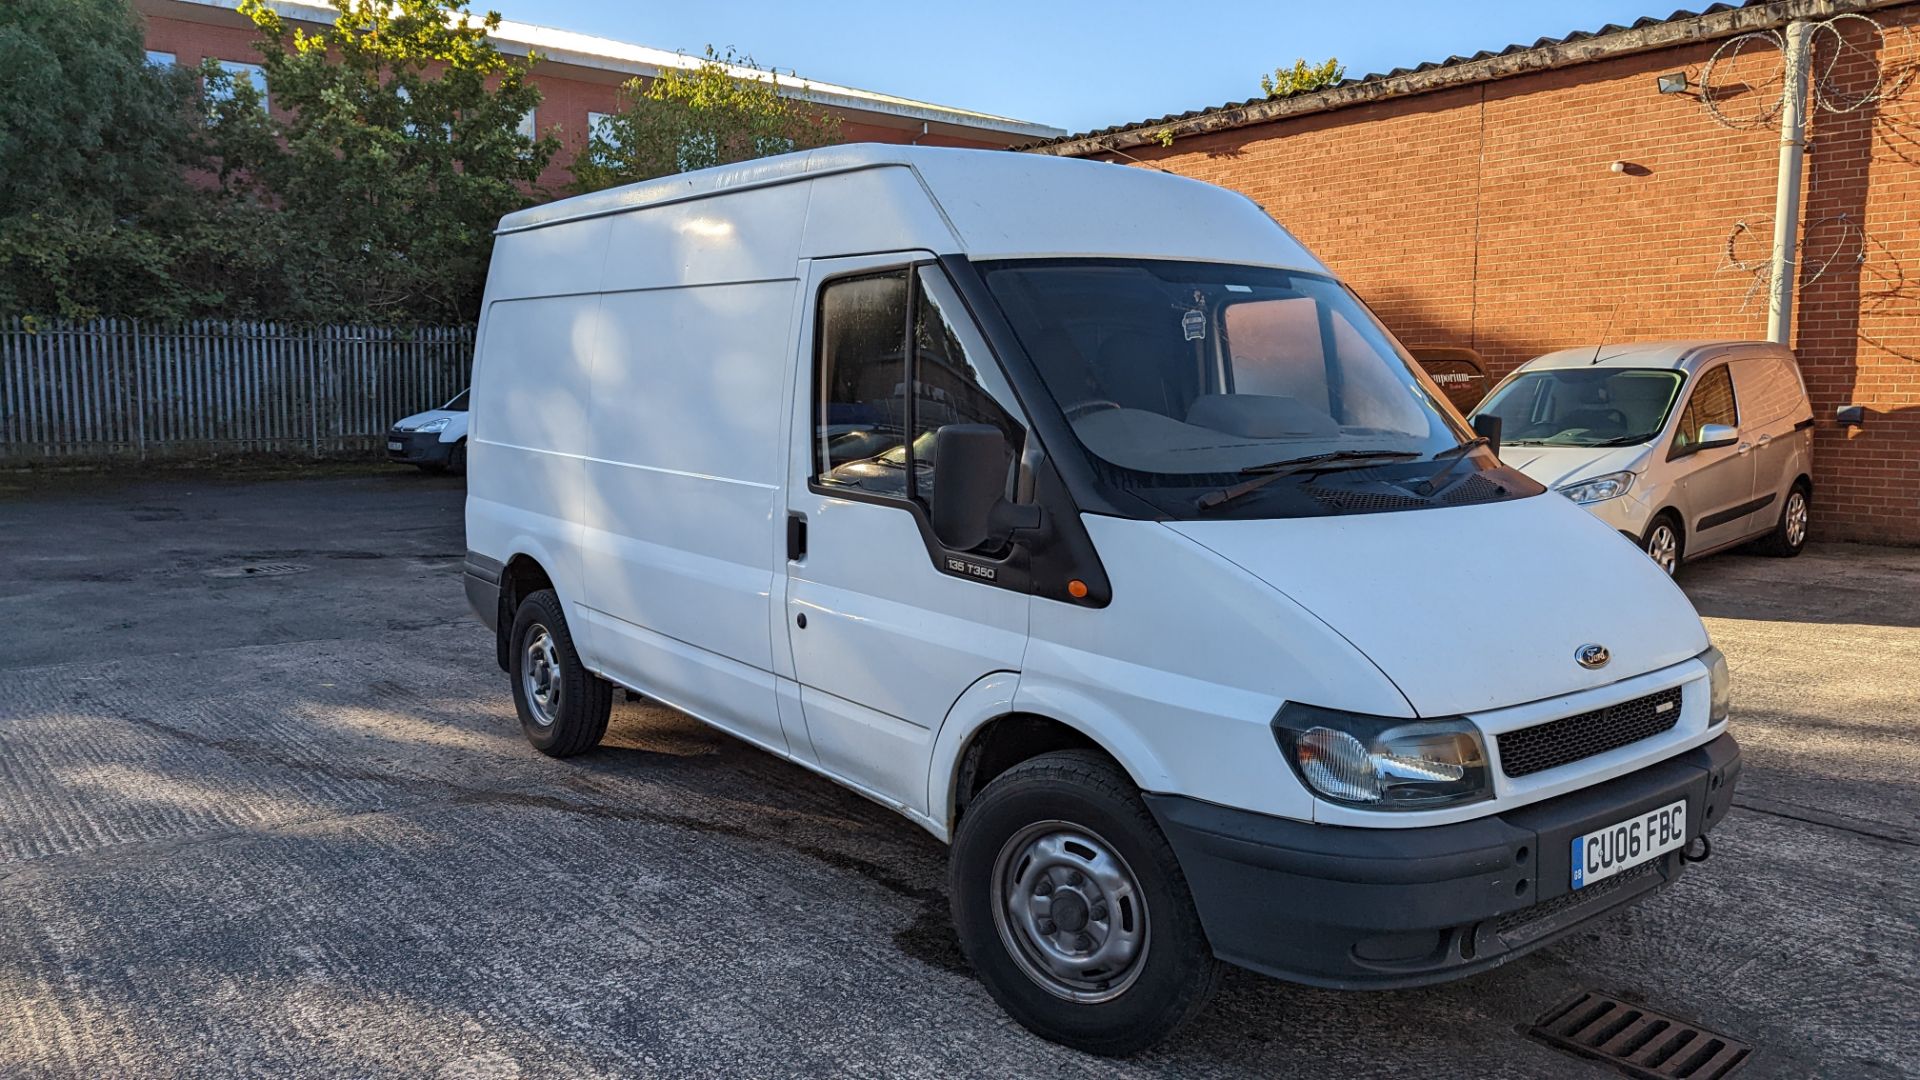 CU06 FBC Ford Transit panel van, 6 speed manual gearbox, 2402cc diesel engine. Colour: white. Fir - Image 2 of 44